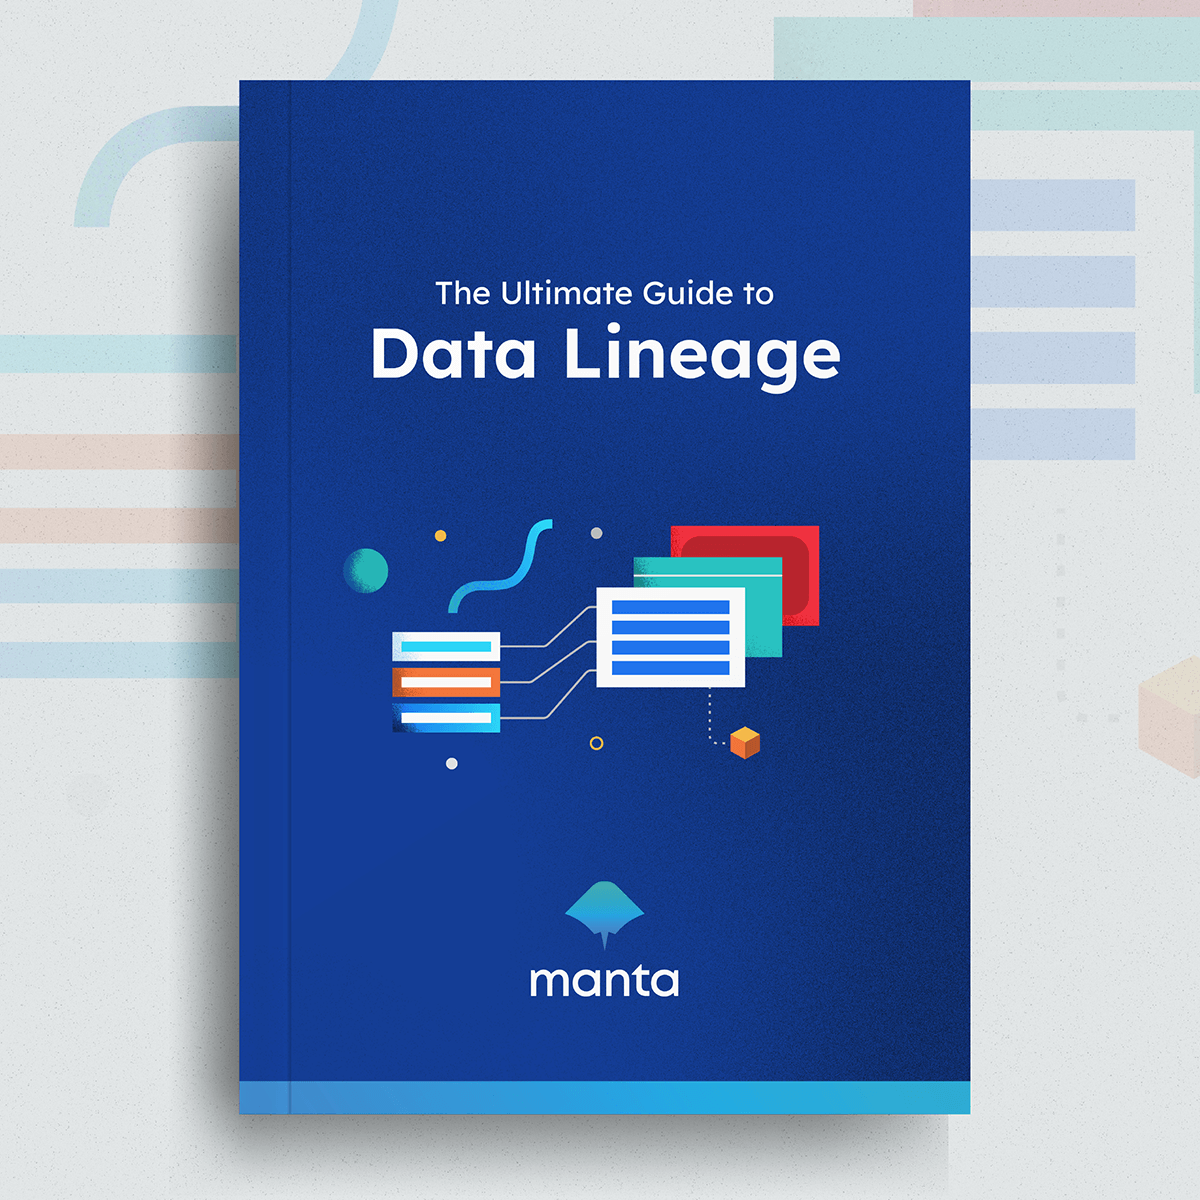 The Ultimate Guide to Data Lineage